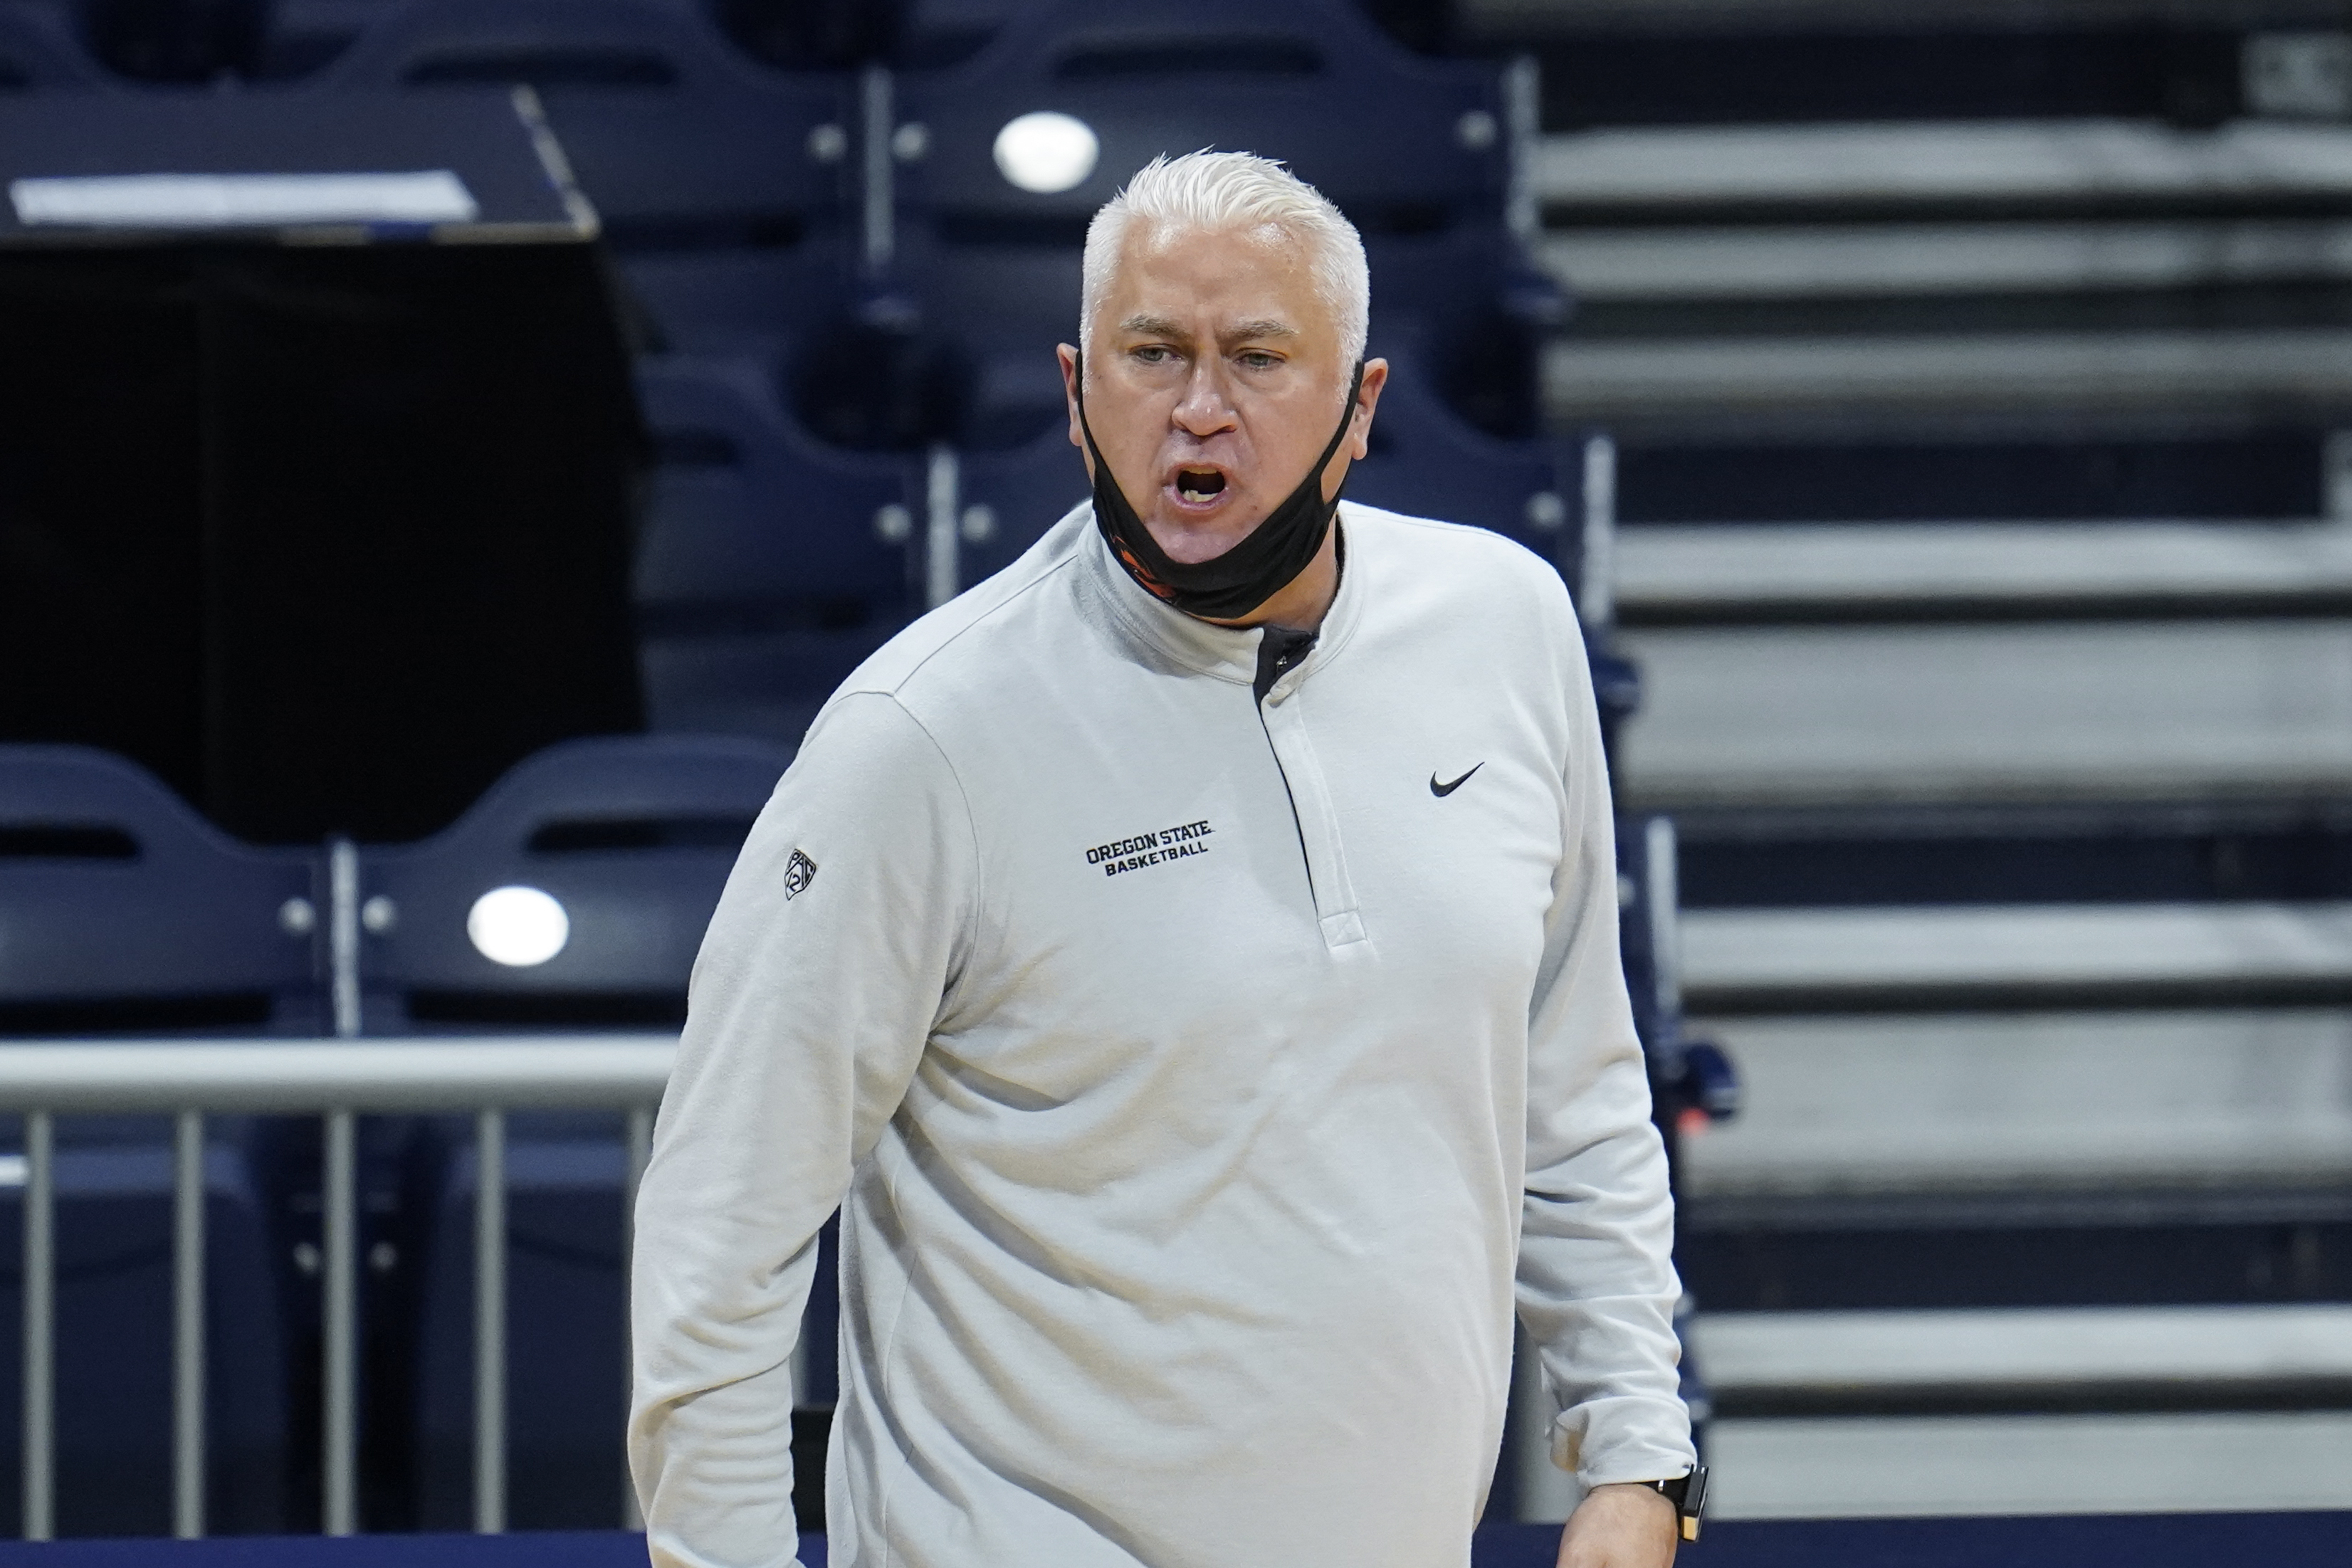 Oregon State coach Wayne Tinkle looks to daughter for Sweet 16 advice - OPB